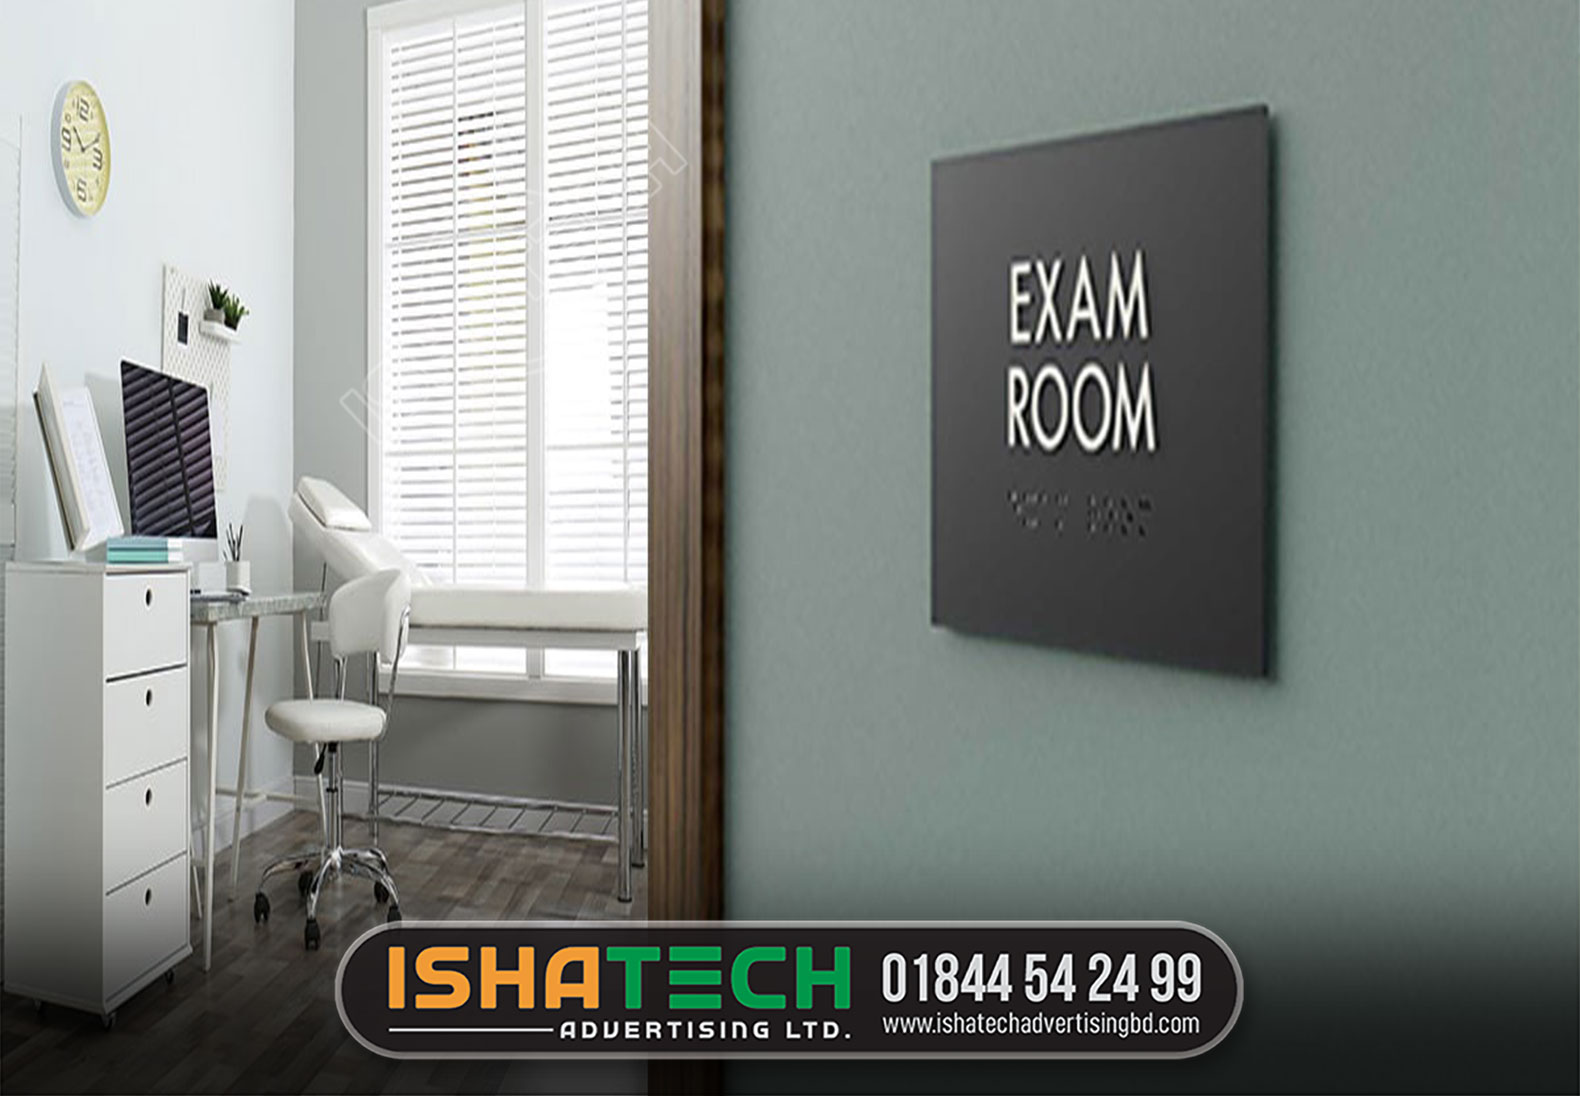 EXAM ROOM NAME PLATE, ACRYLIC 3D NAME PALTE MAKING BDY ISHATECH ADVERTISING LTD